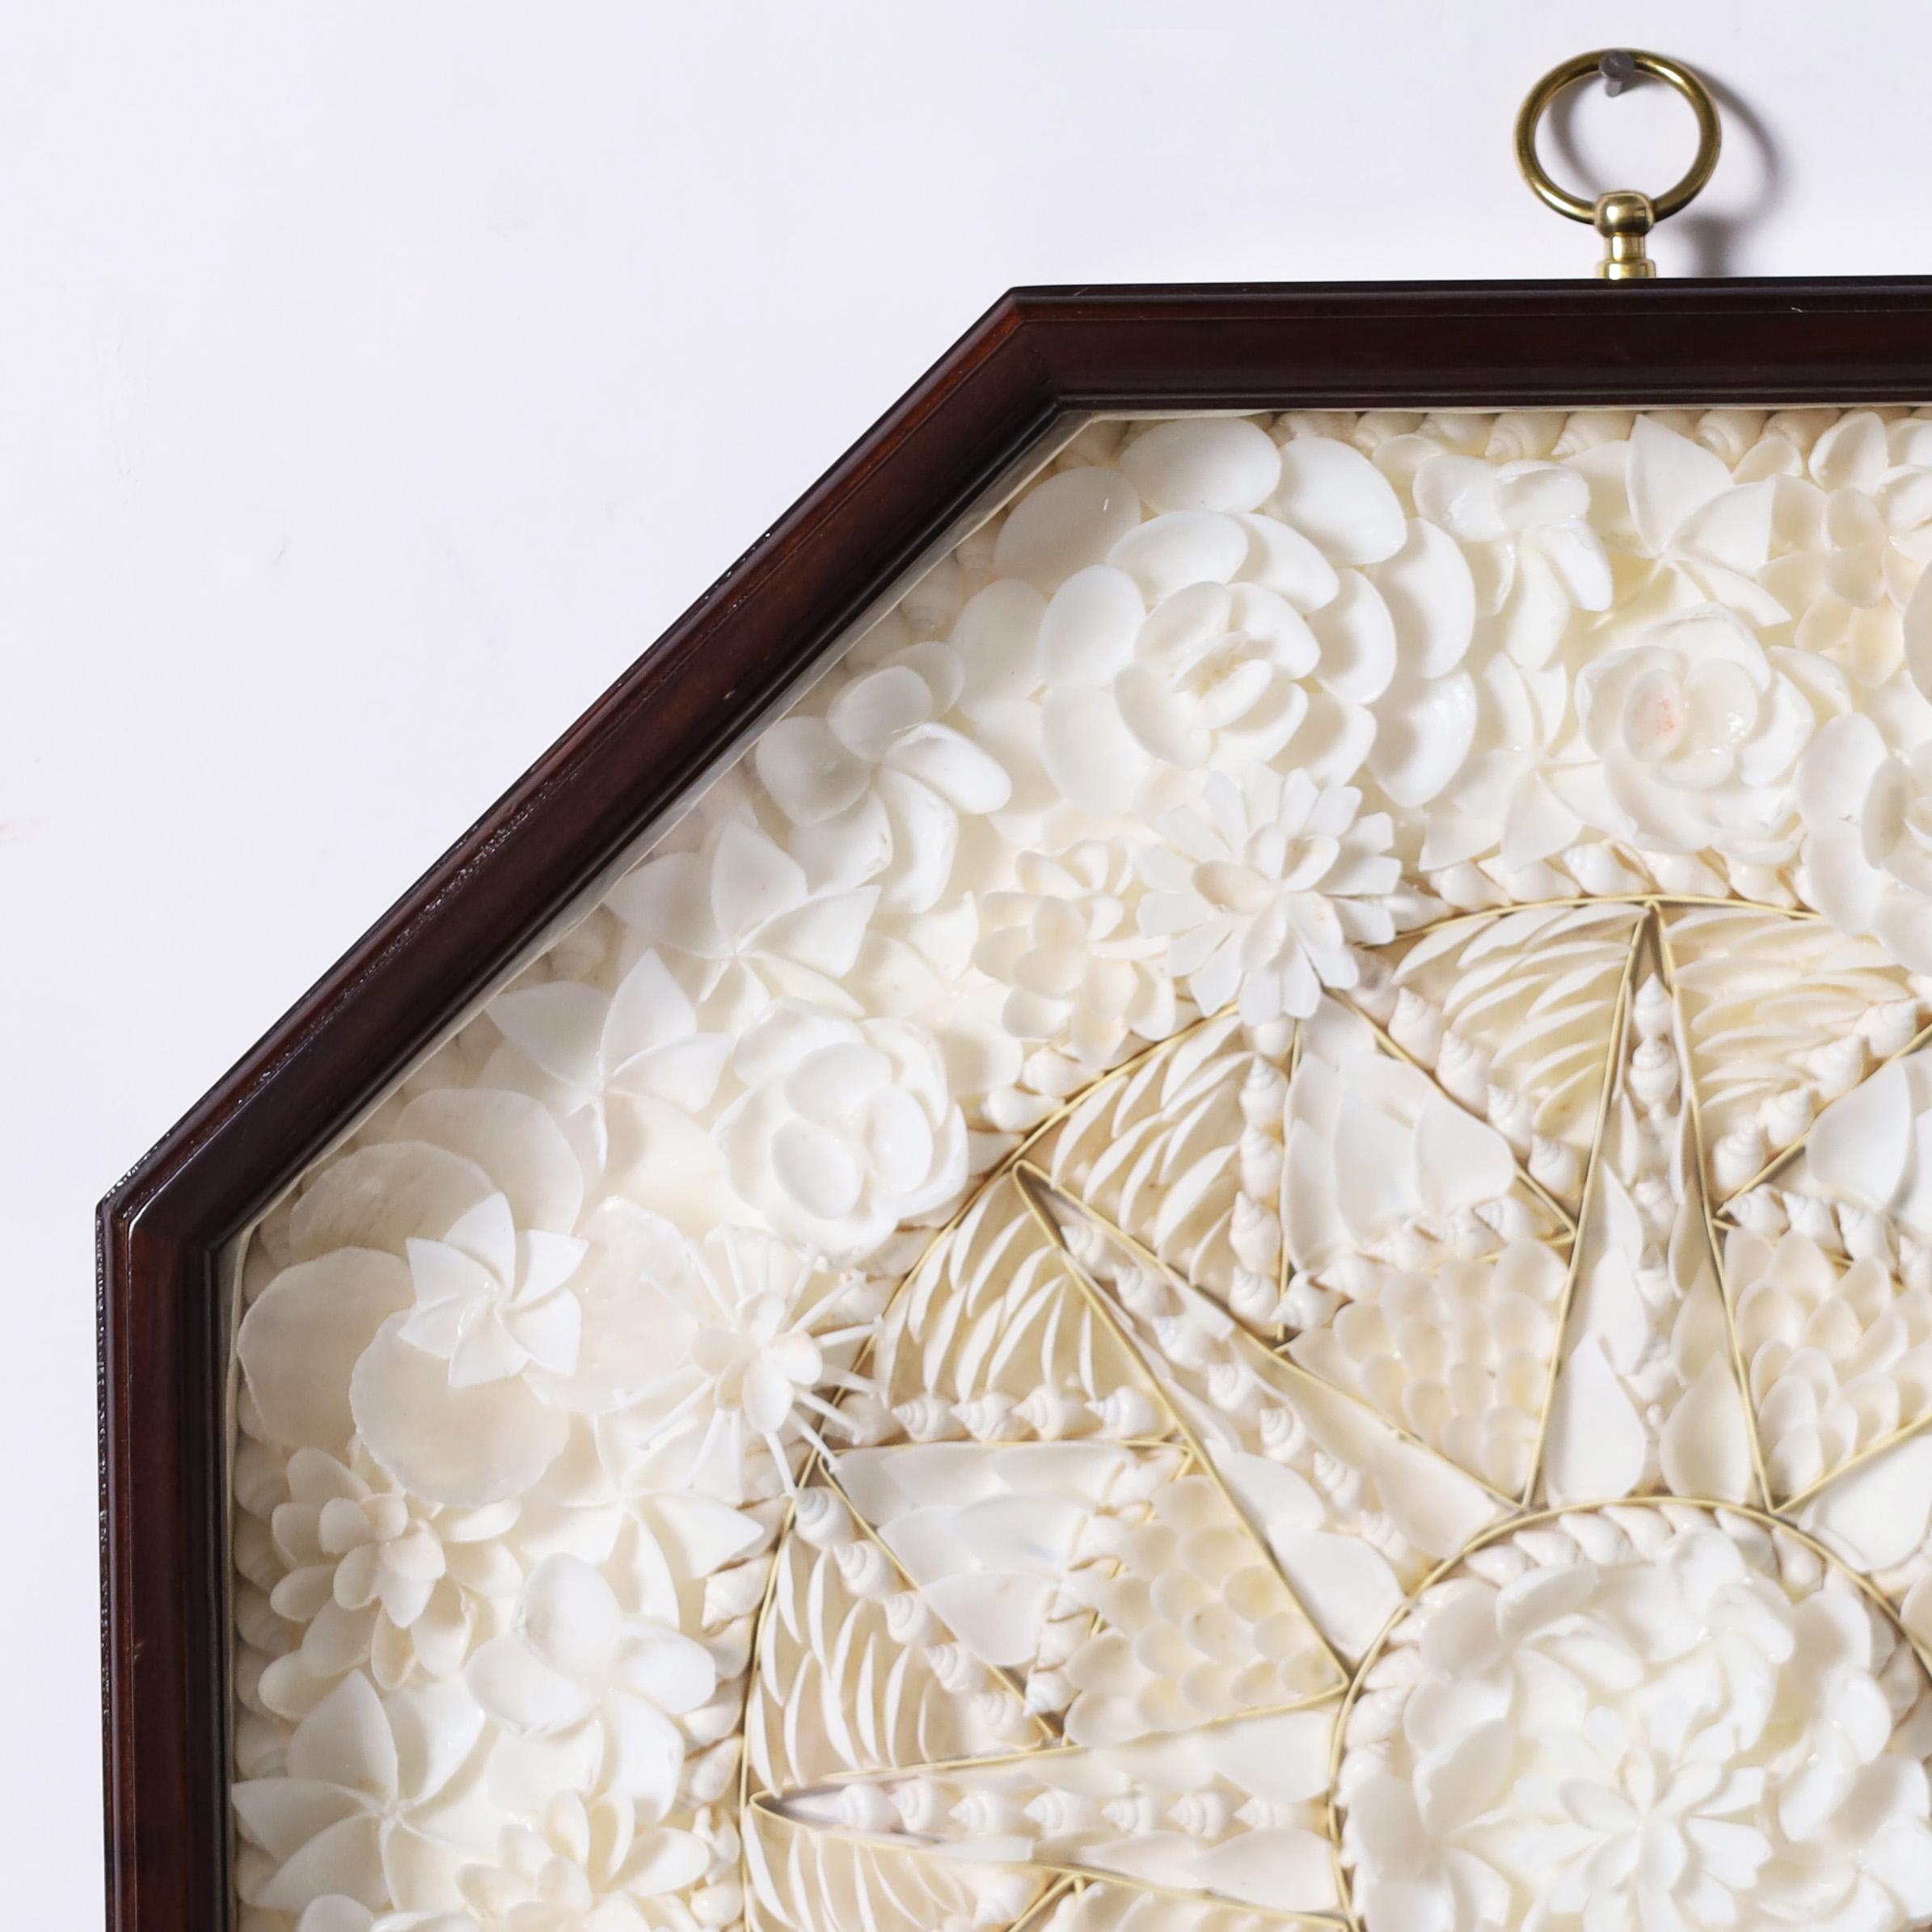 Charming sailor's valentine ambitiously hand crafted with white seashell specimens in star form composition and presented under glass in an octagon shadow box by Authentic Models. 